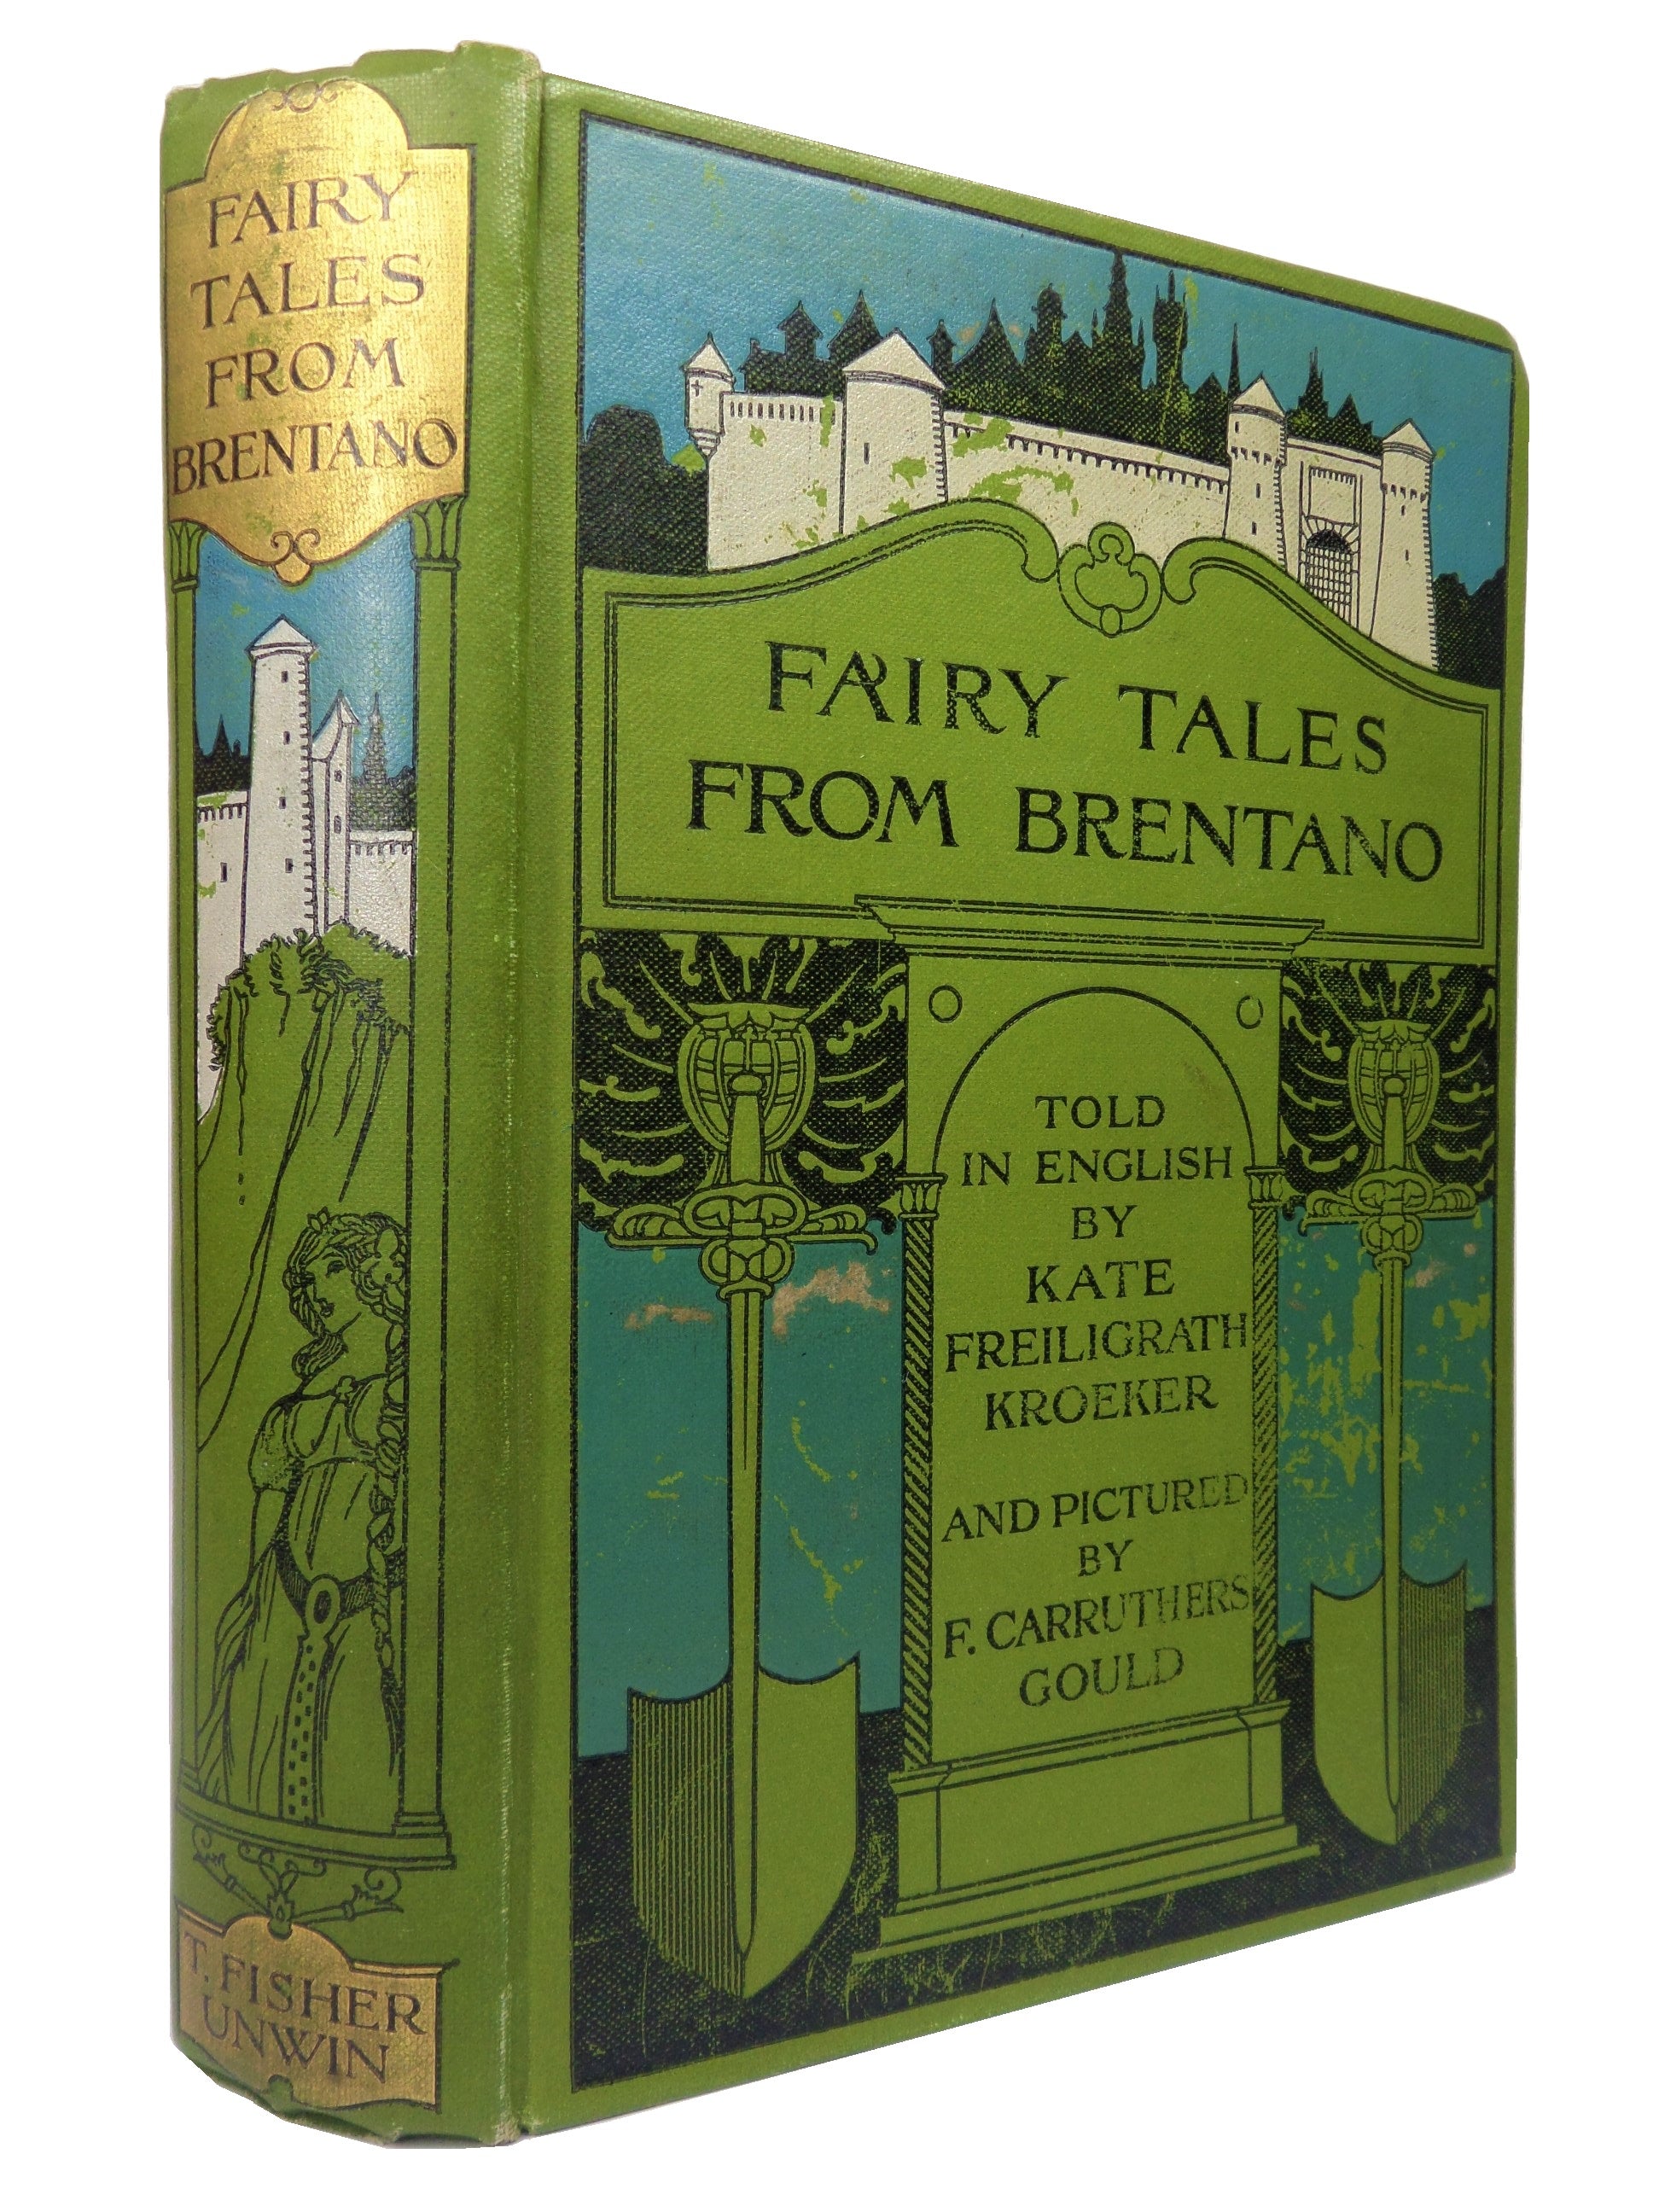 FAIRY TALES FROM BRENTANO TOLD BY KATE FREILIGRATH KROEKER 1911 F. CARRUTHERS GOULD ILLUSTRATIONS